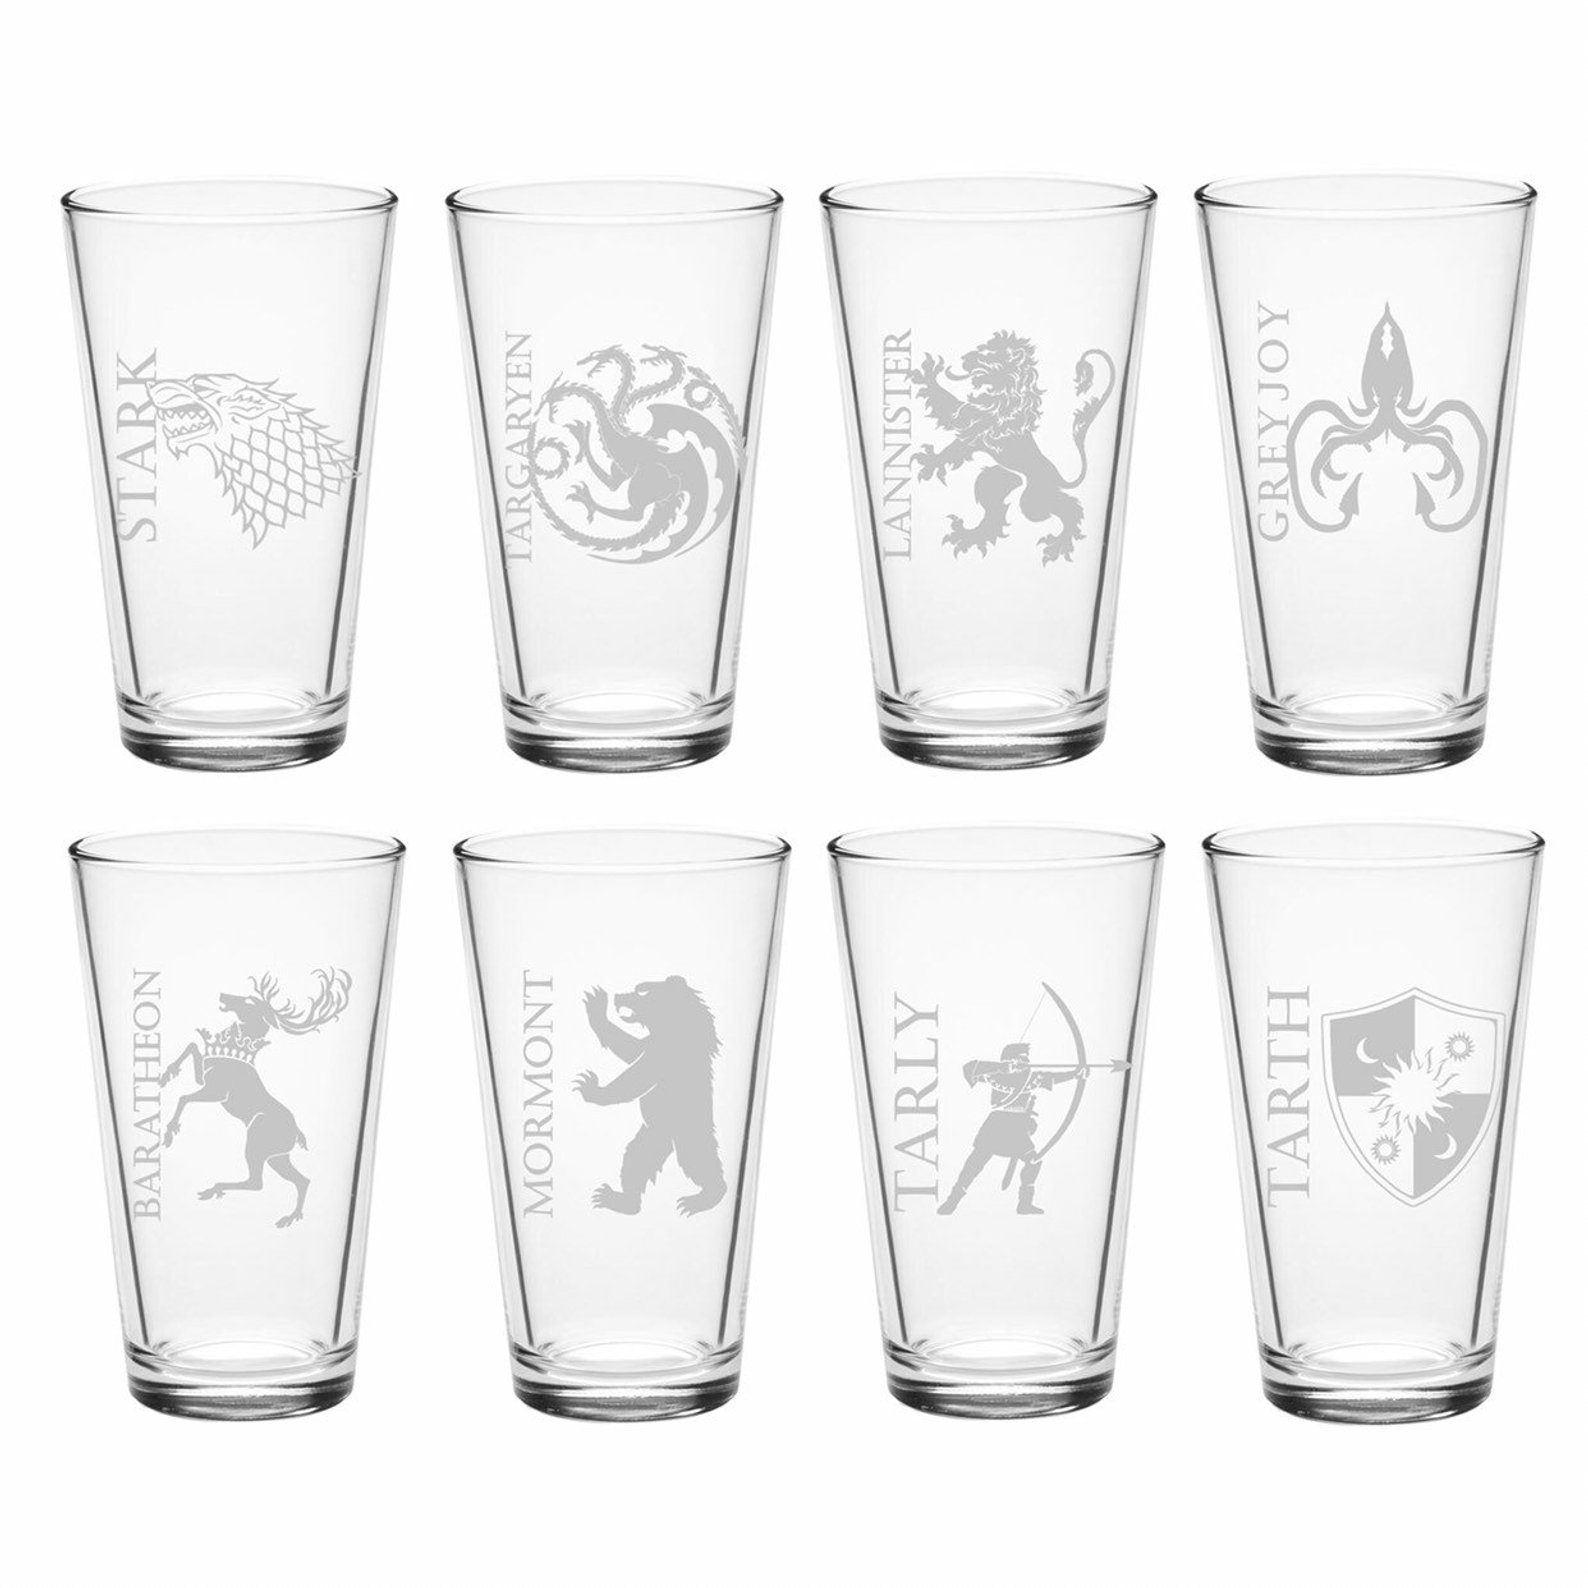 Game of Thrones glasses